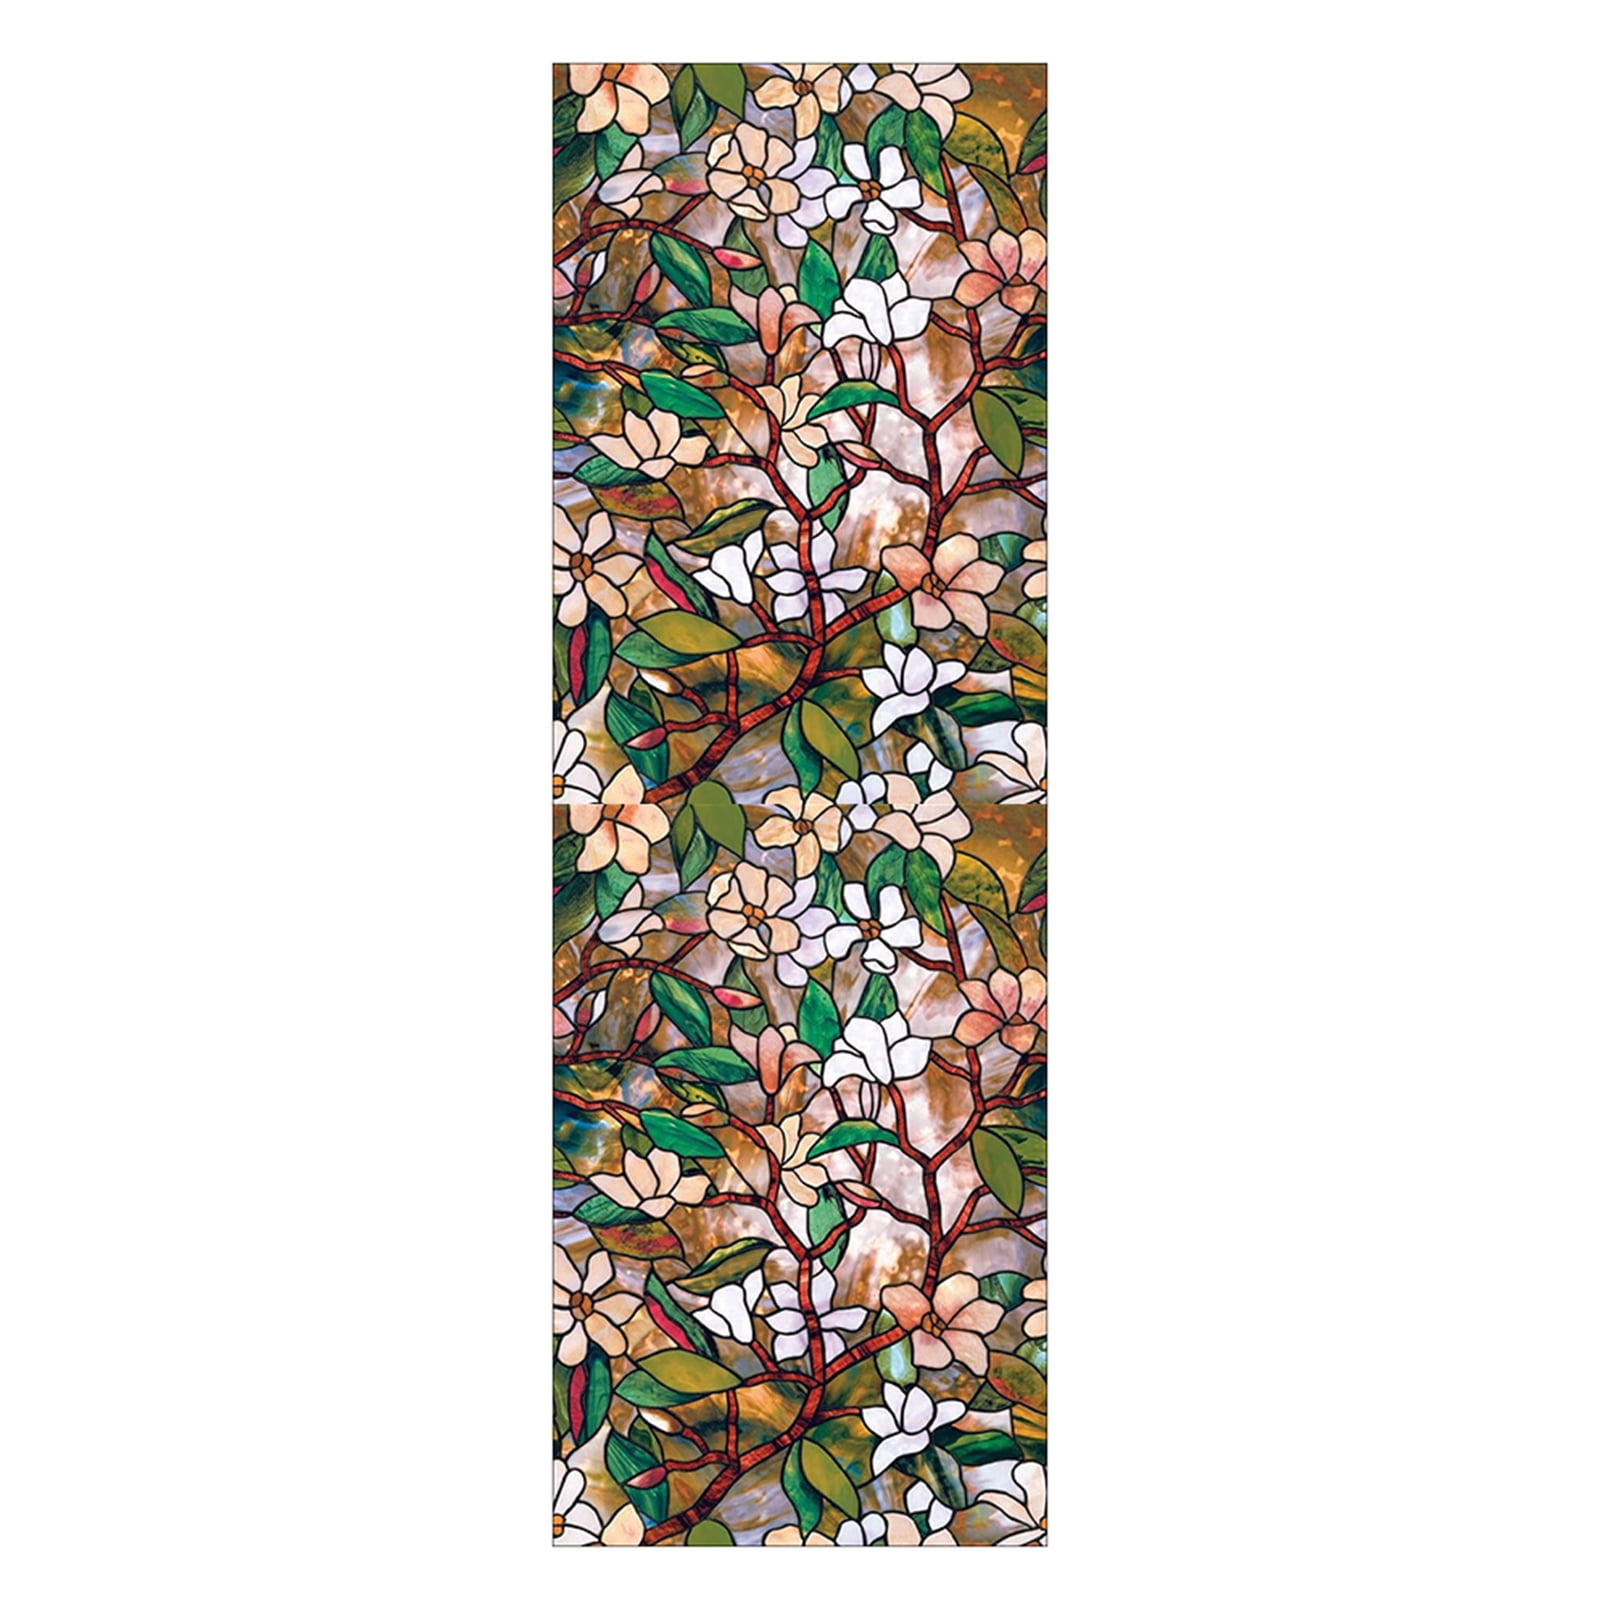 New FLORAL Privacy Stained Glass Decorative Window Film Magnolia Decor Gift USA 